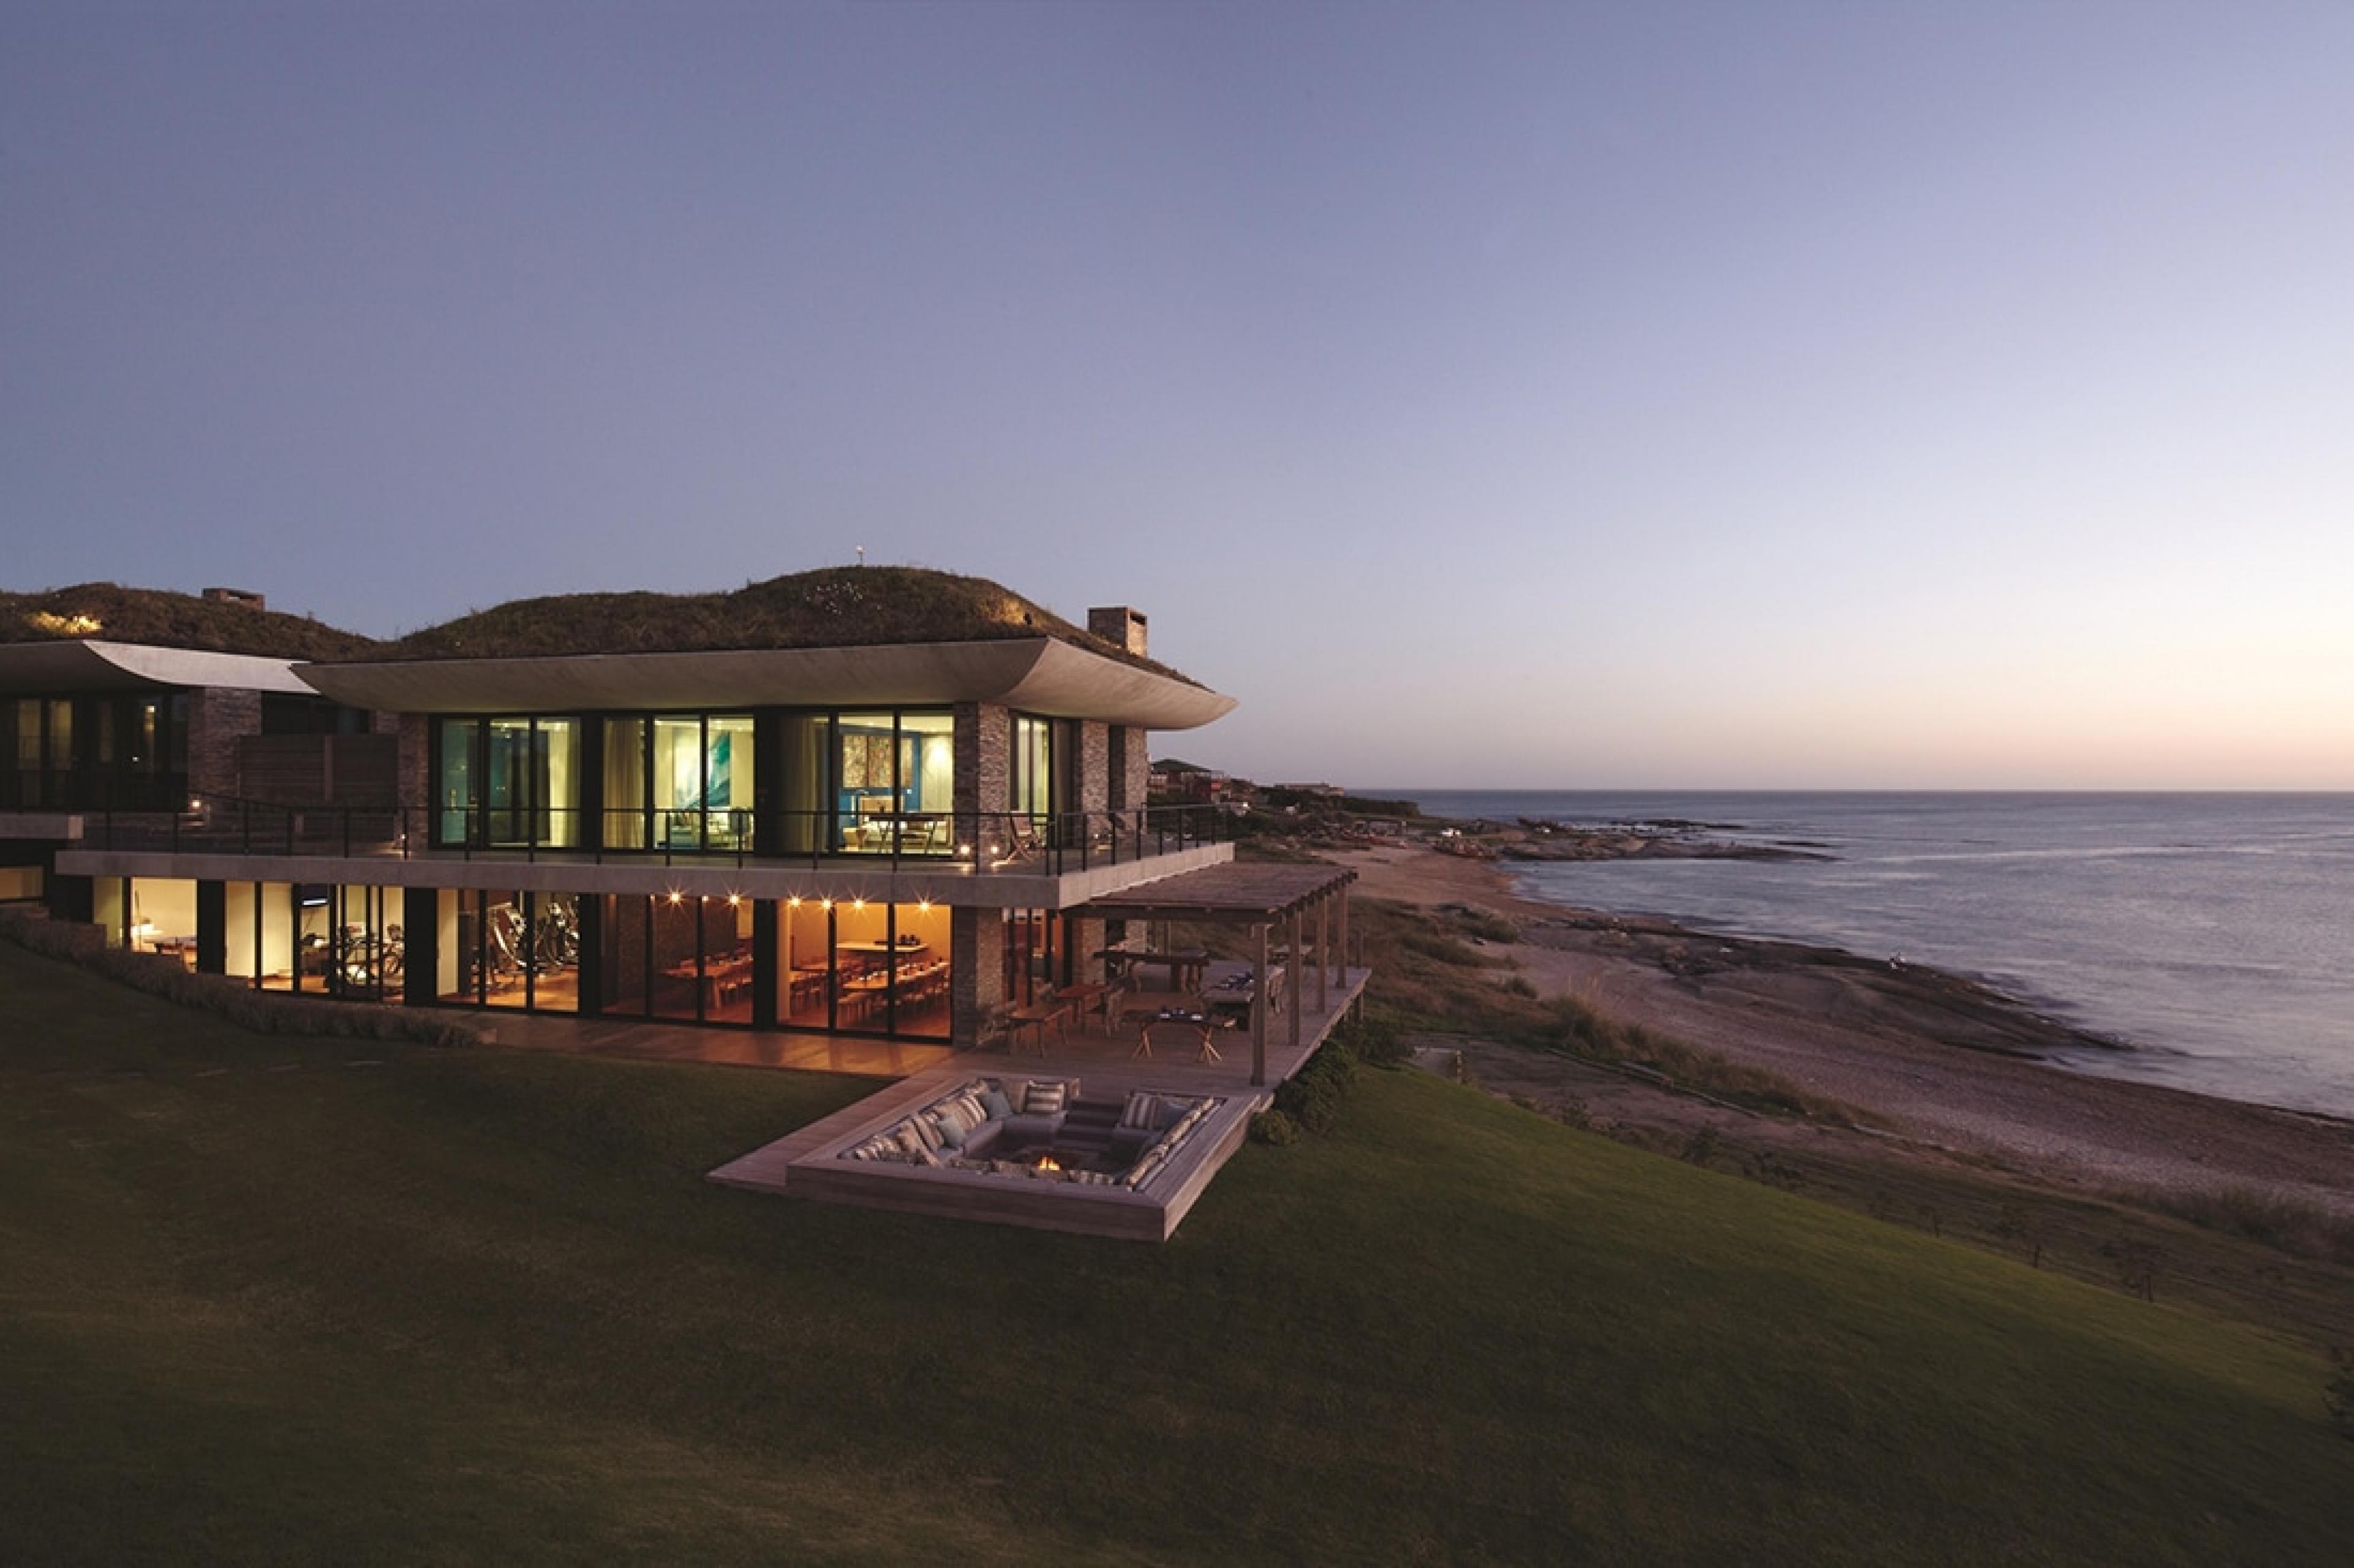 oceanfront two-story villa at night with art visible inside